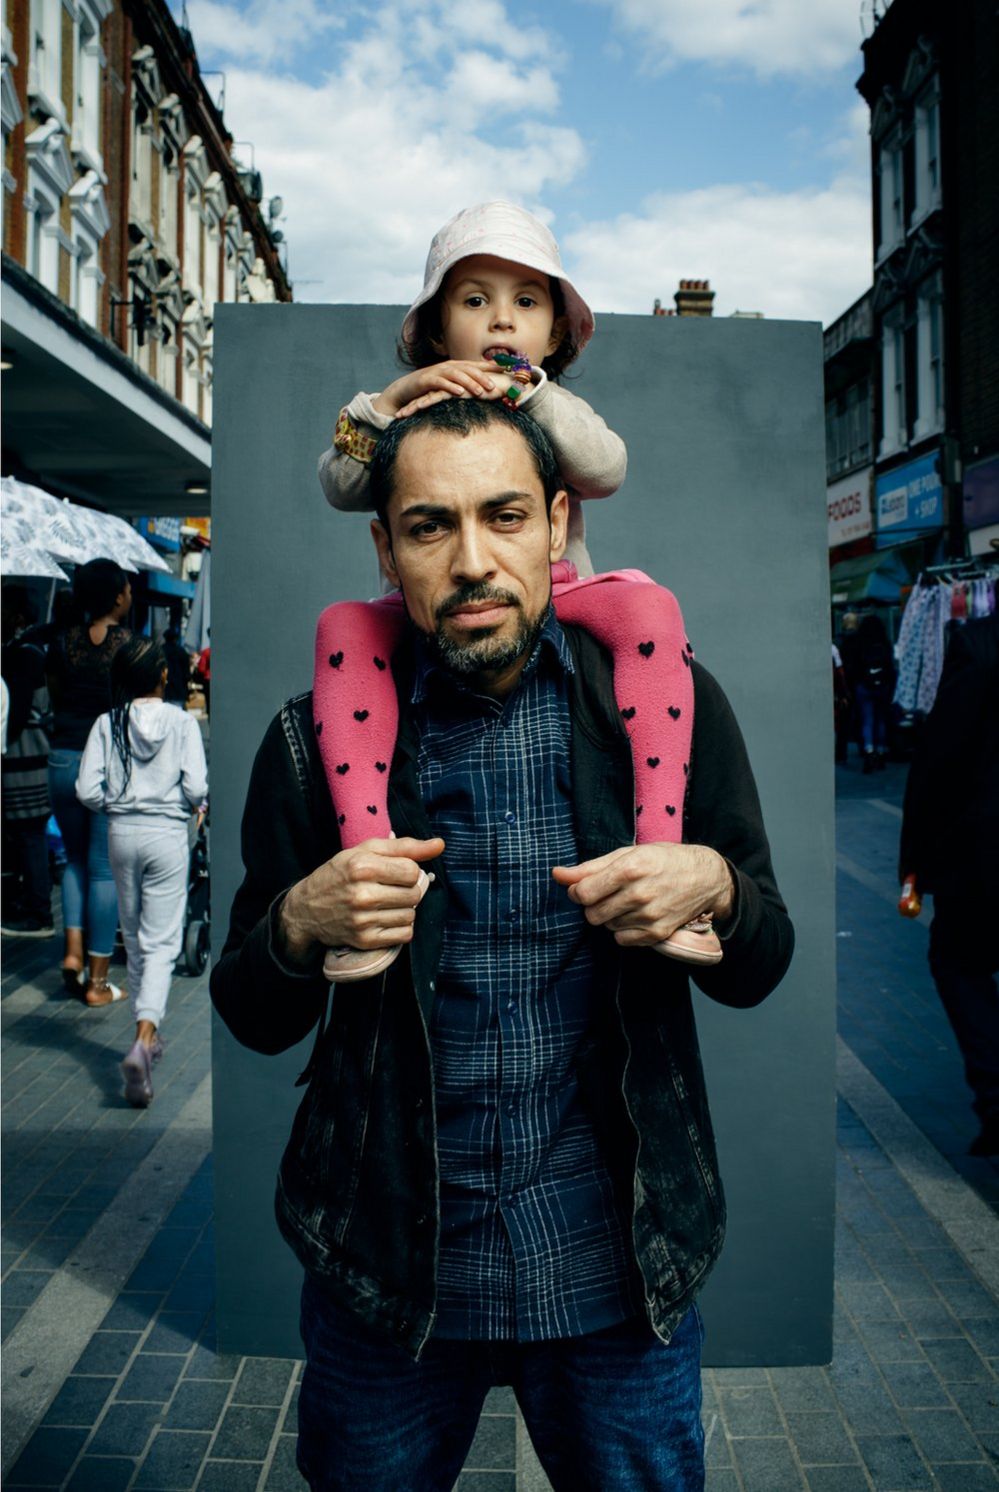 Portrait of a man with a child sat on his shoulders